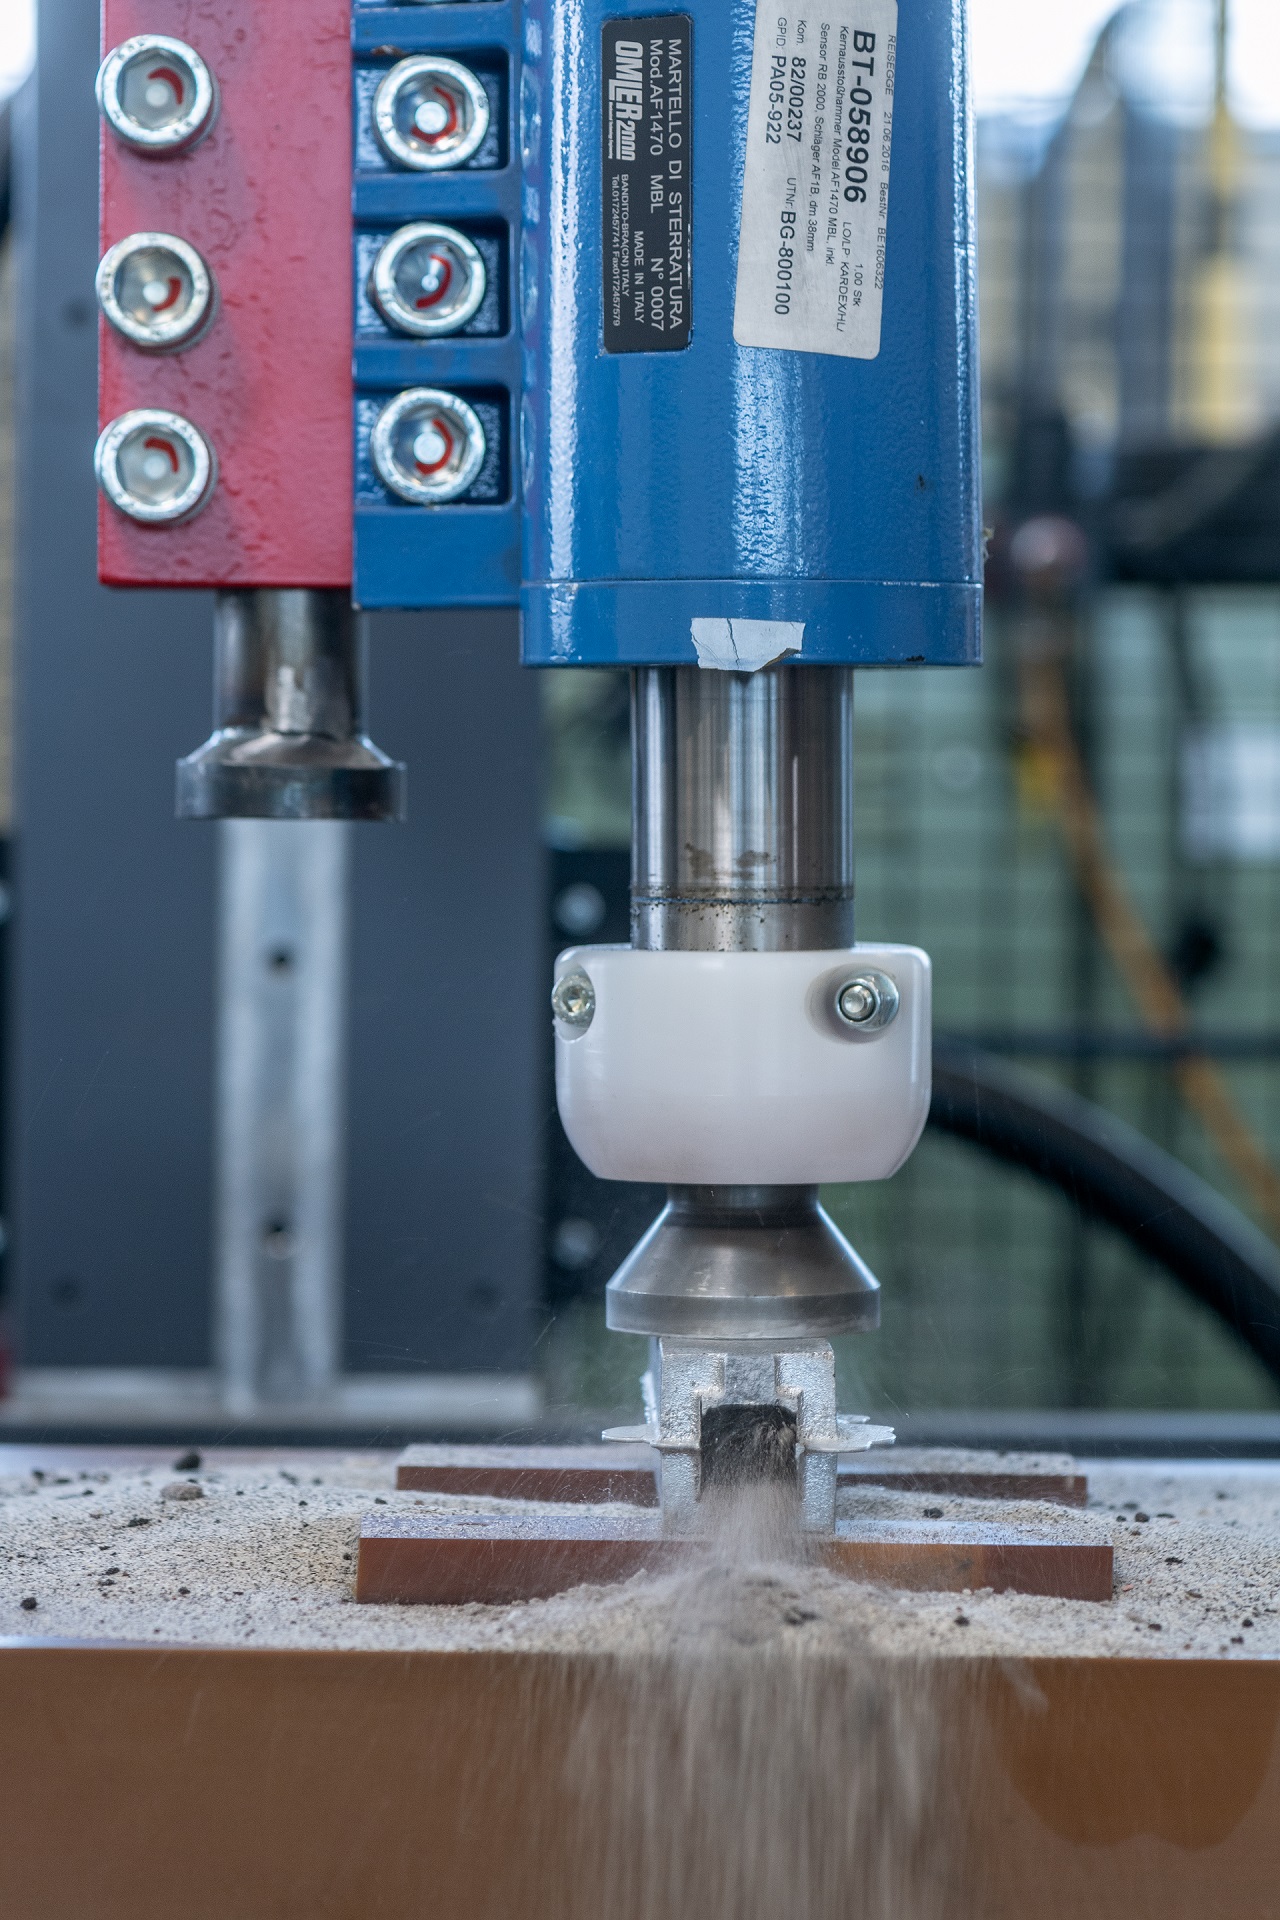 Coring hammer in the coring process